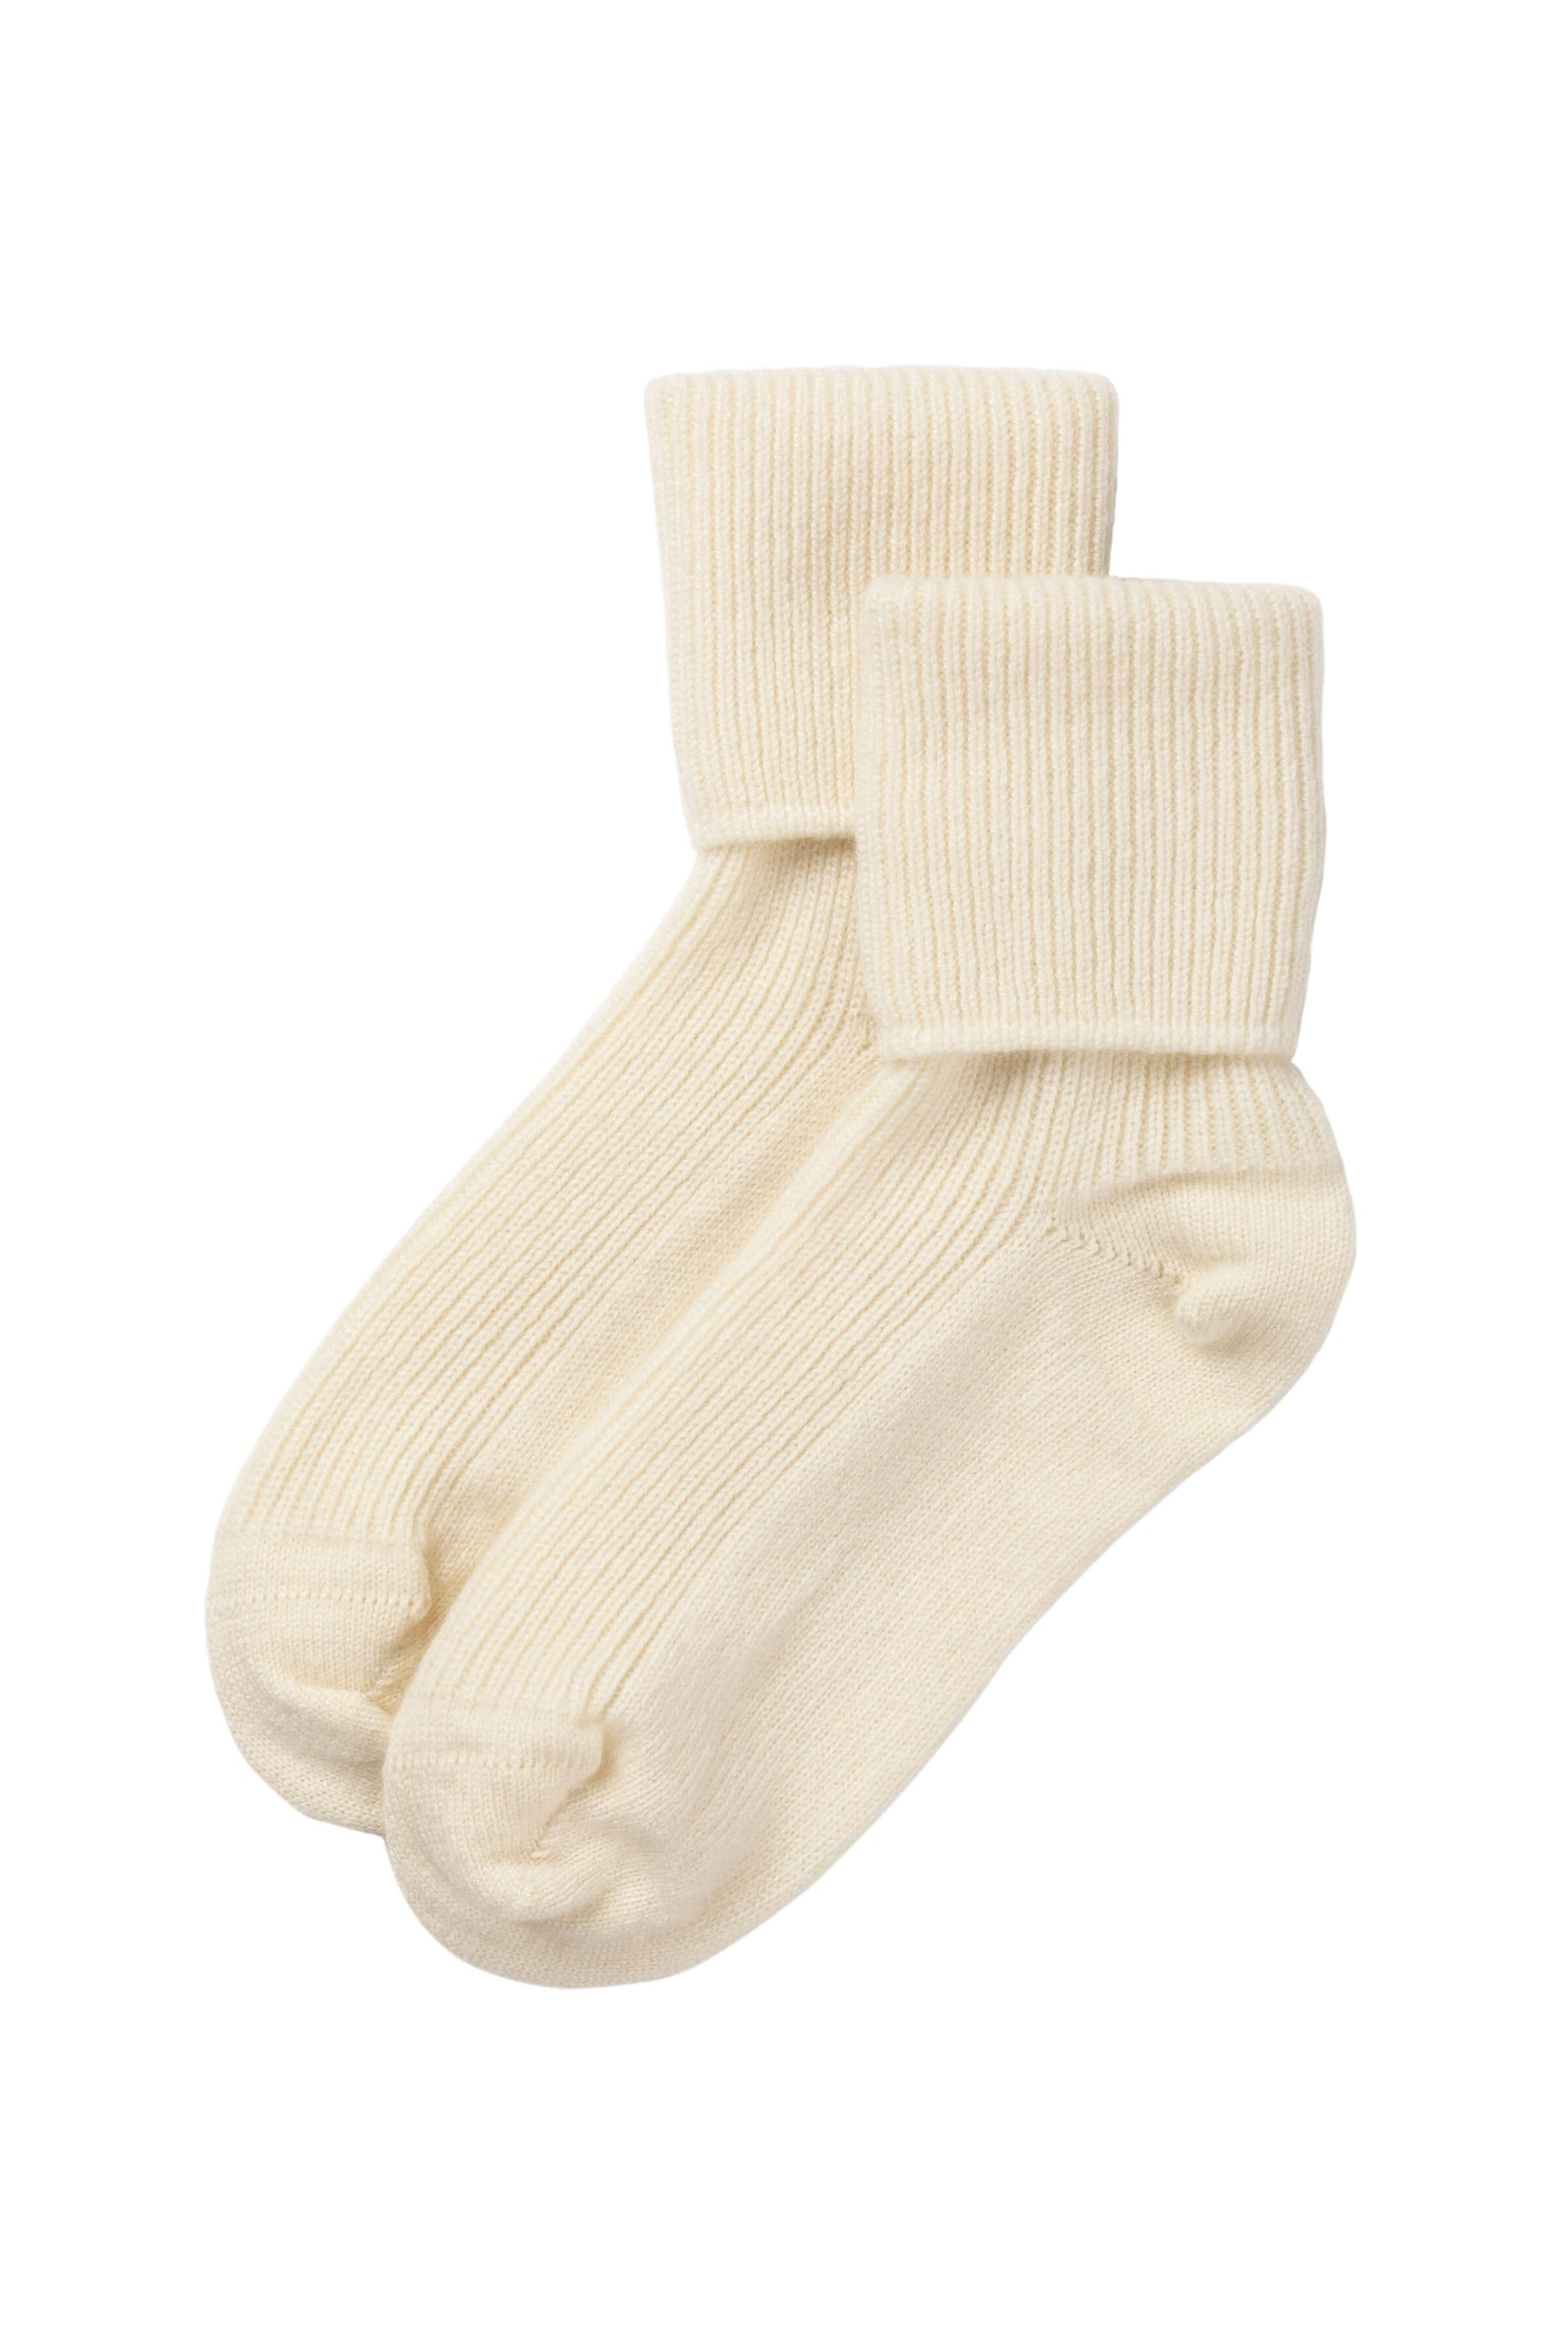 Johnstons of Elgin AW24 Knitted Accessory White Women's Pure Cashmere Bed Socks HAG02565SA0050ONE